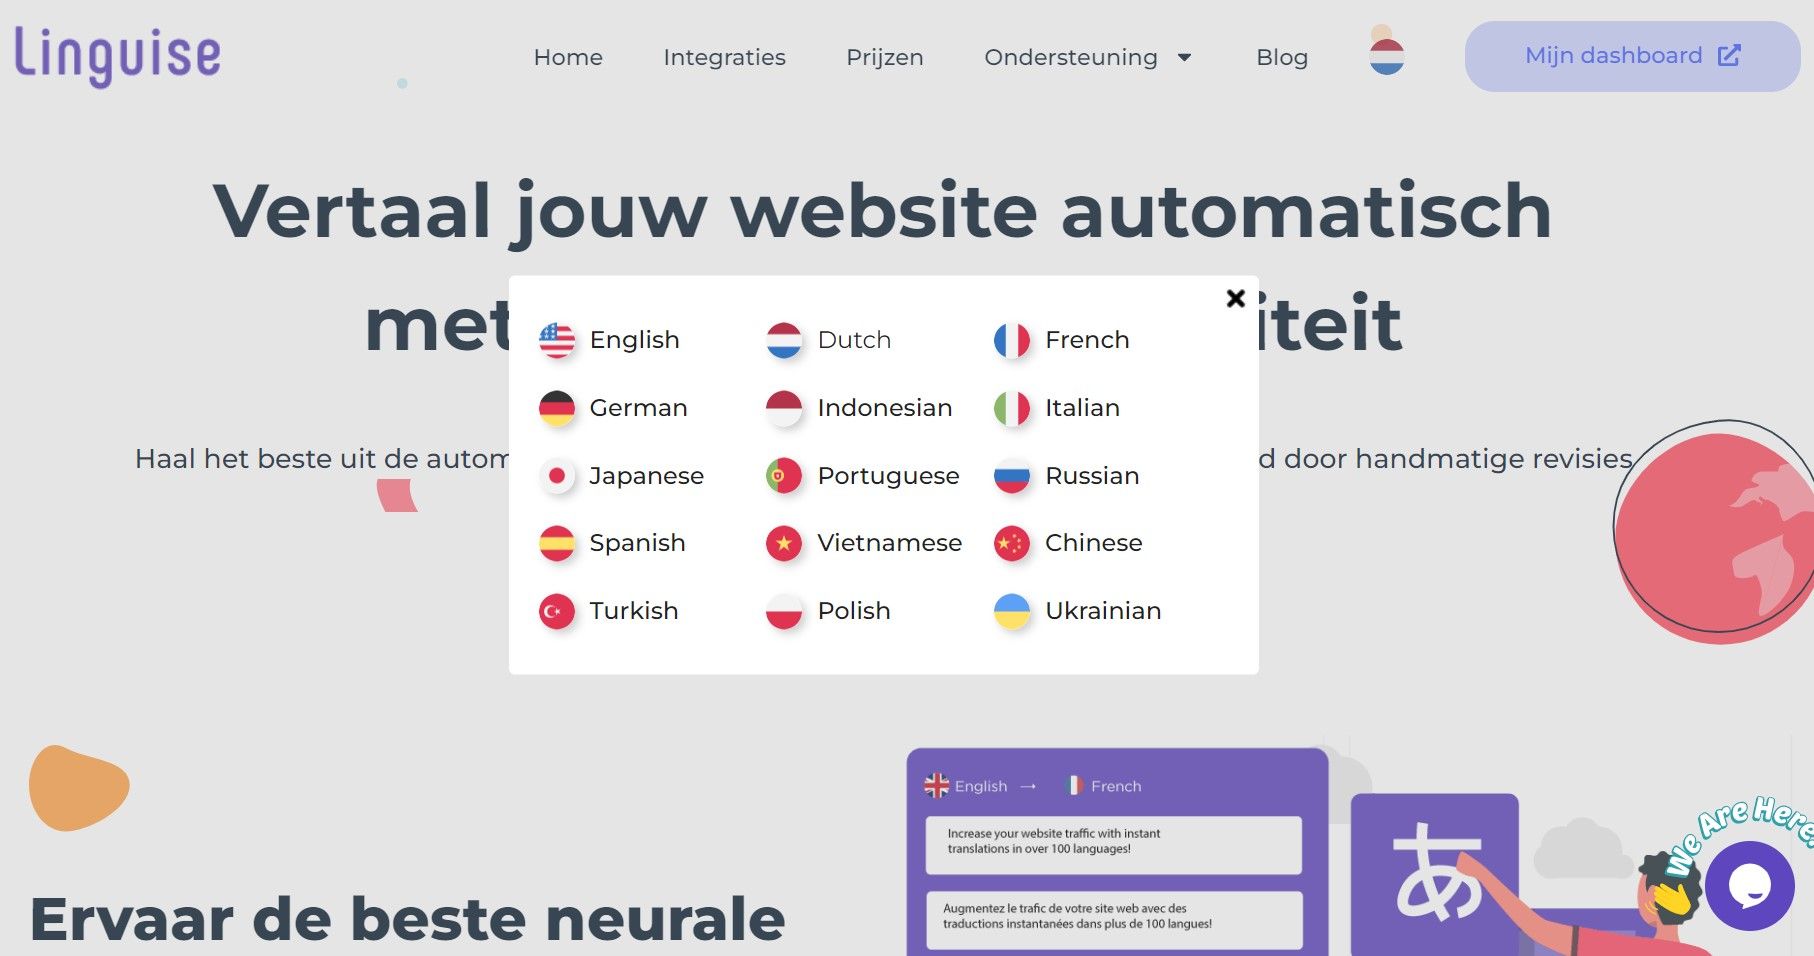 How to translate your entire website online at an affordable price - try to translate